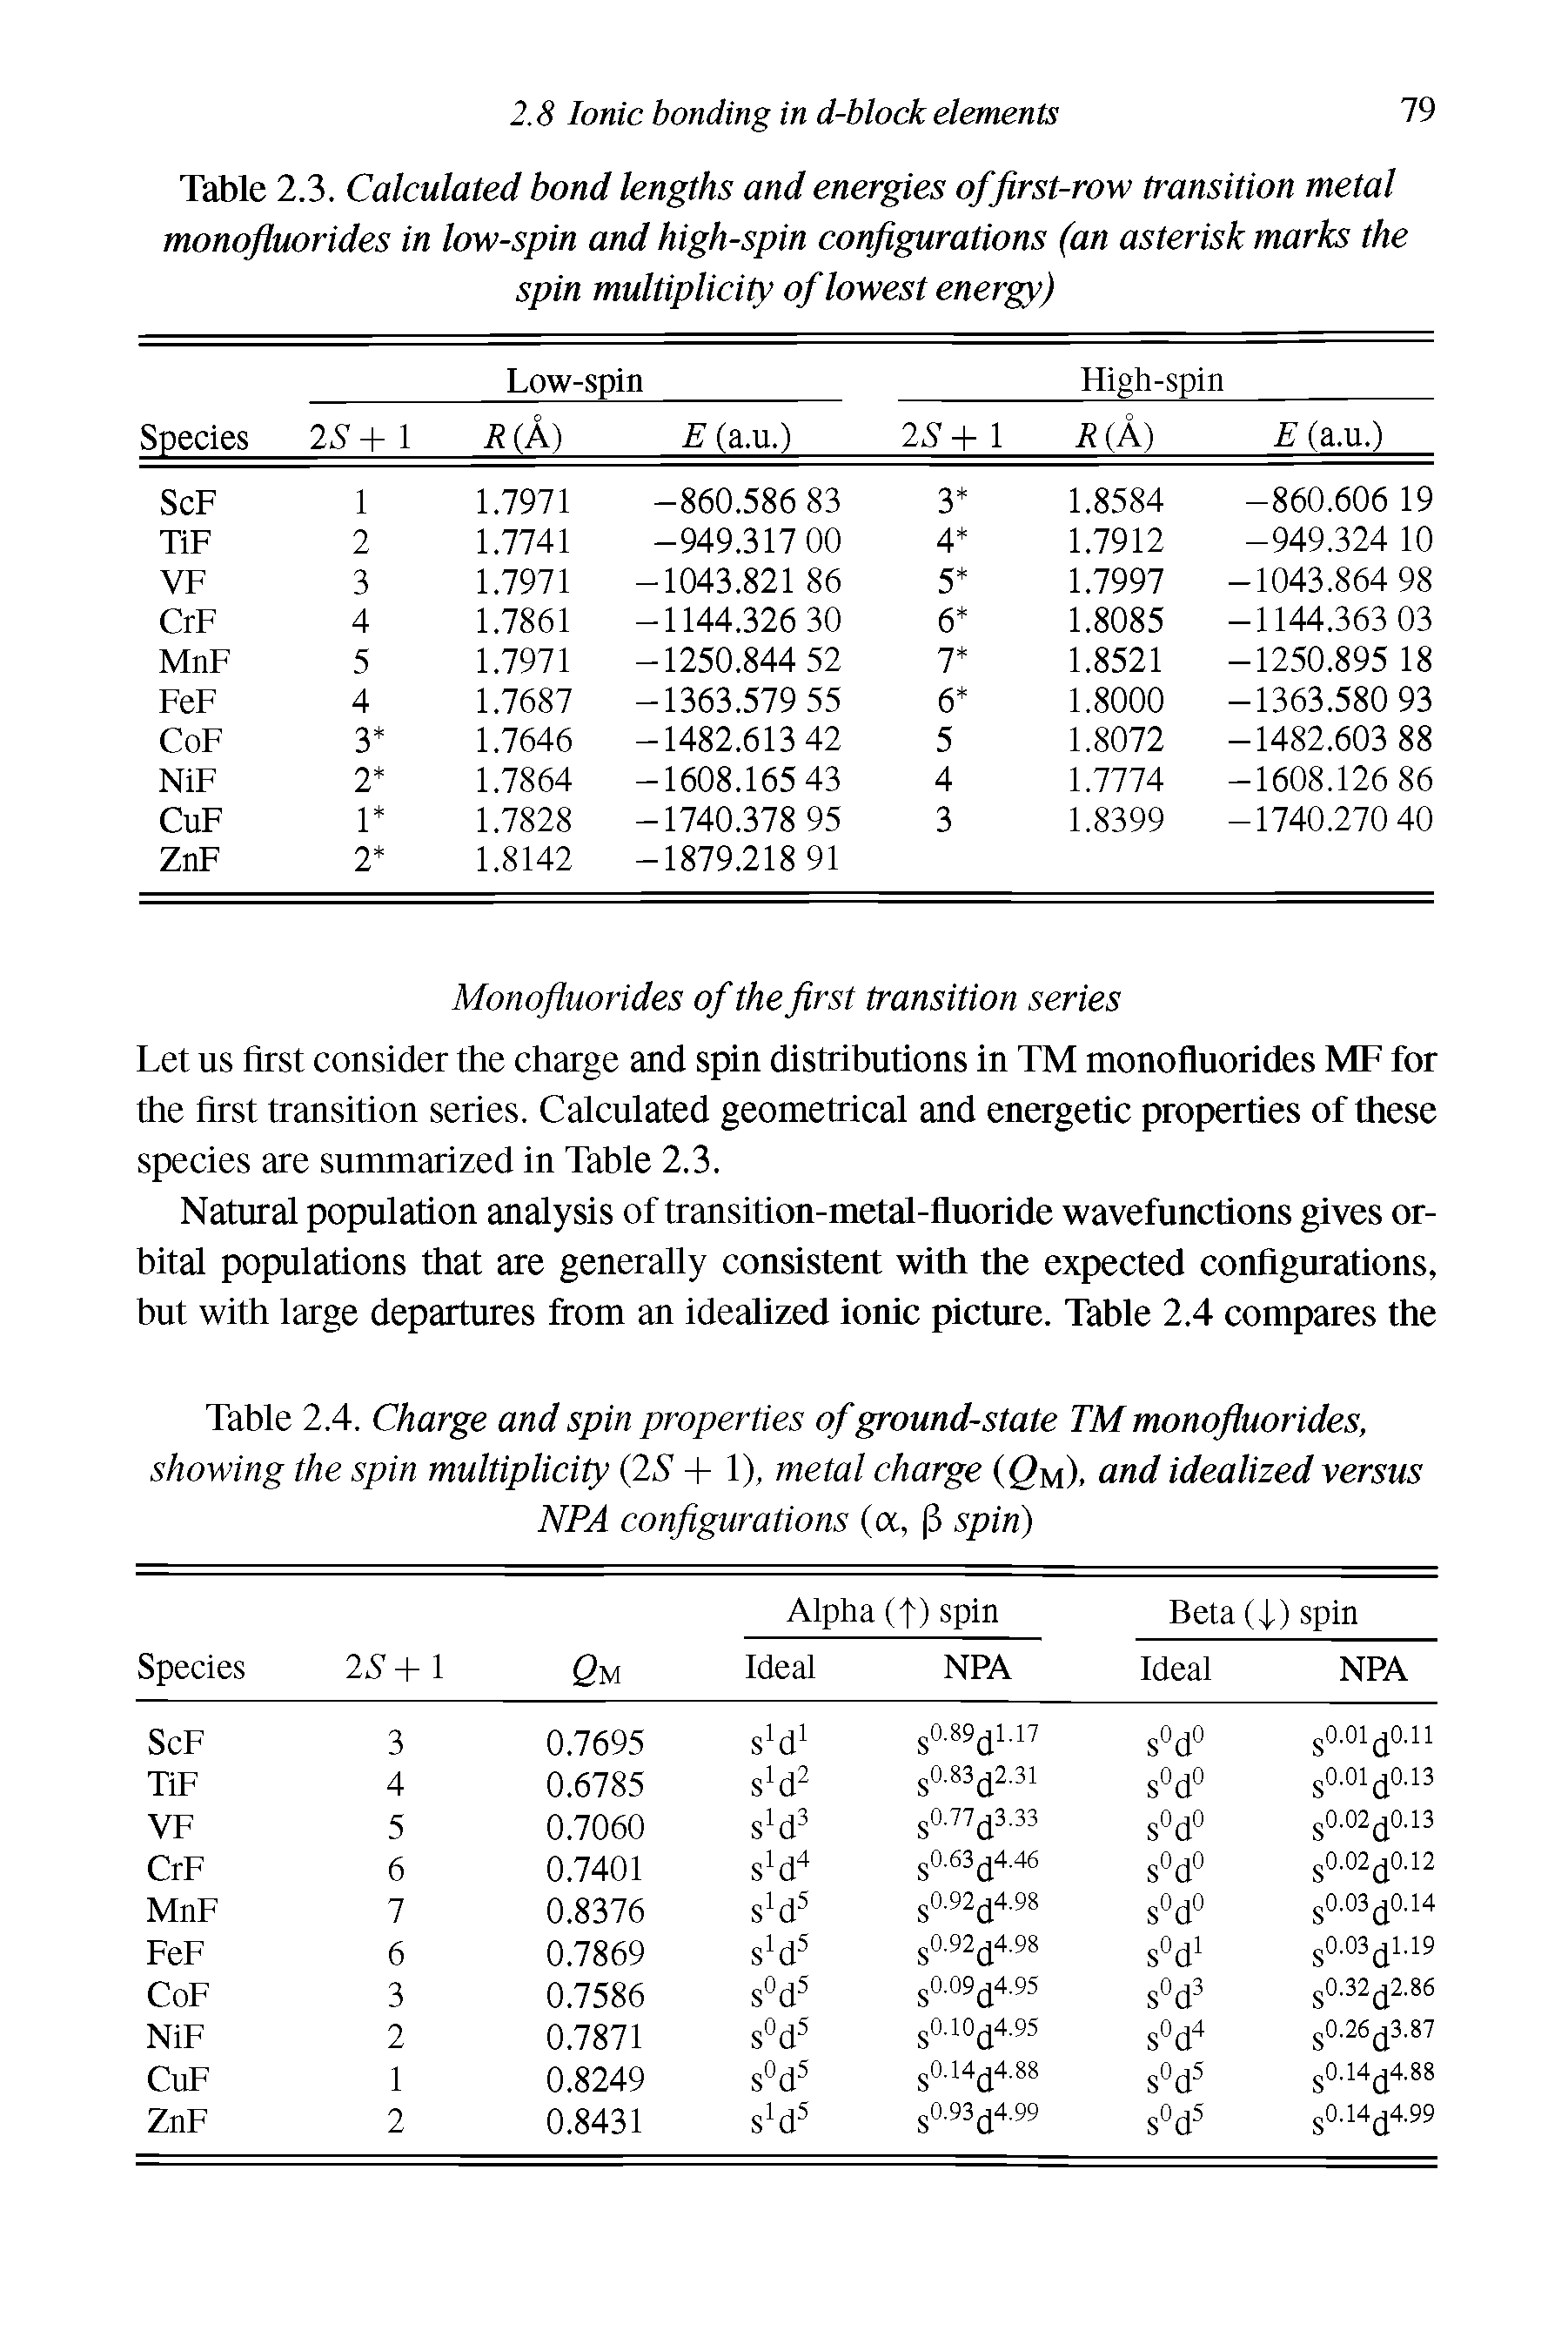 Table 2.4. Charge and spin properties of ground-state TM monofluorides, showing the spin multiplicity (2S + 1), metal charge (Qu), and idealized versus NPA configurations (a, (3 spin)...